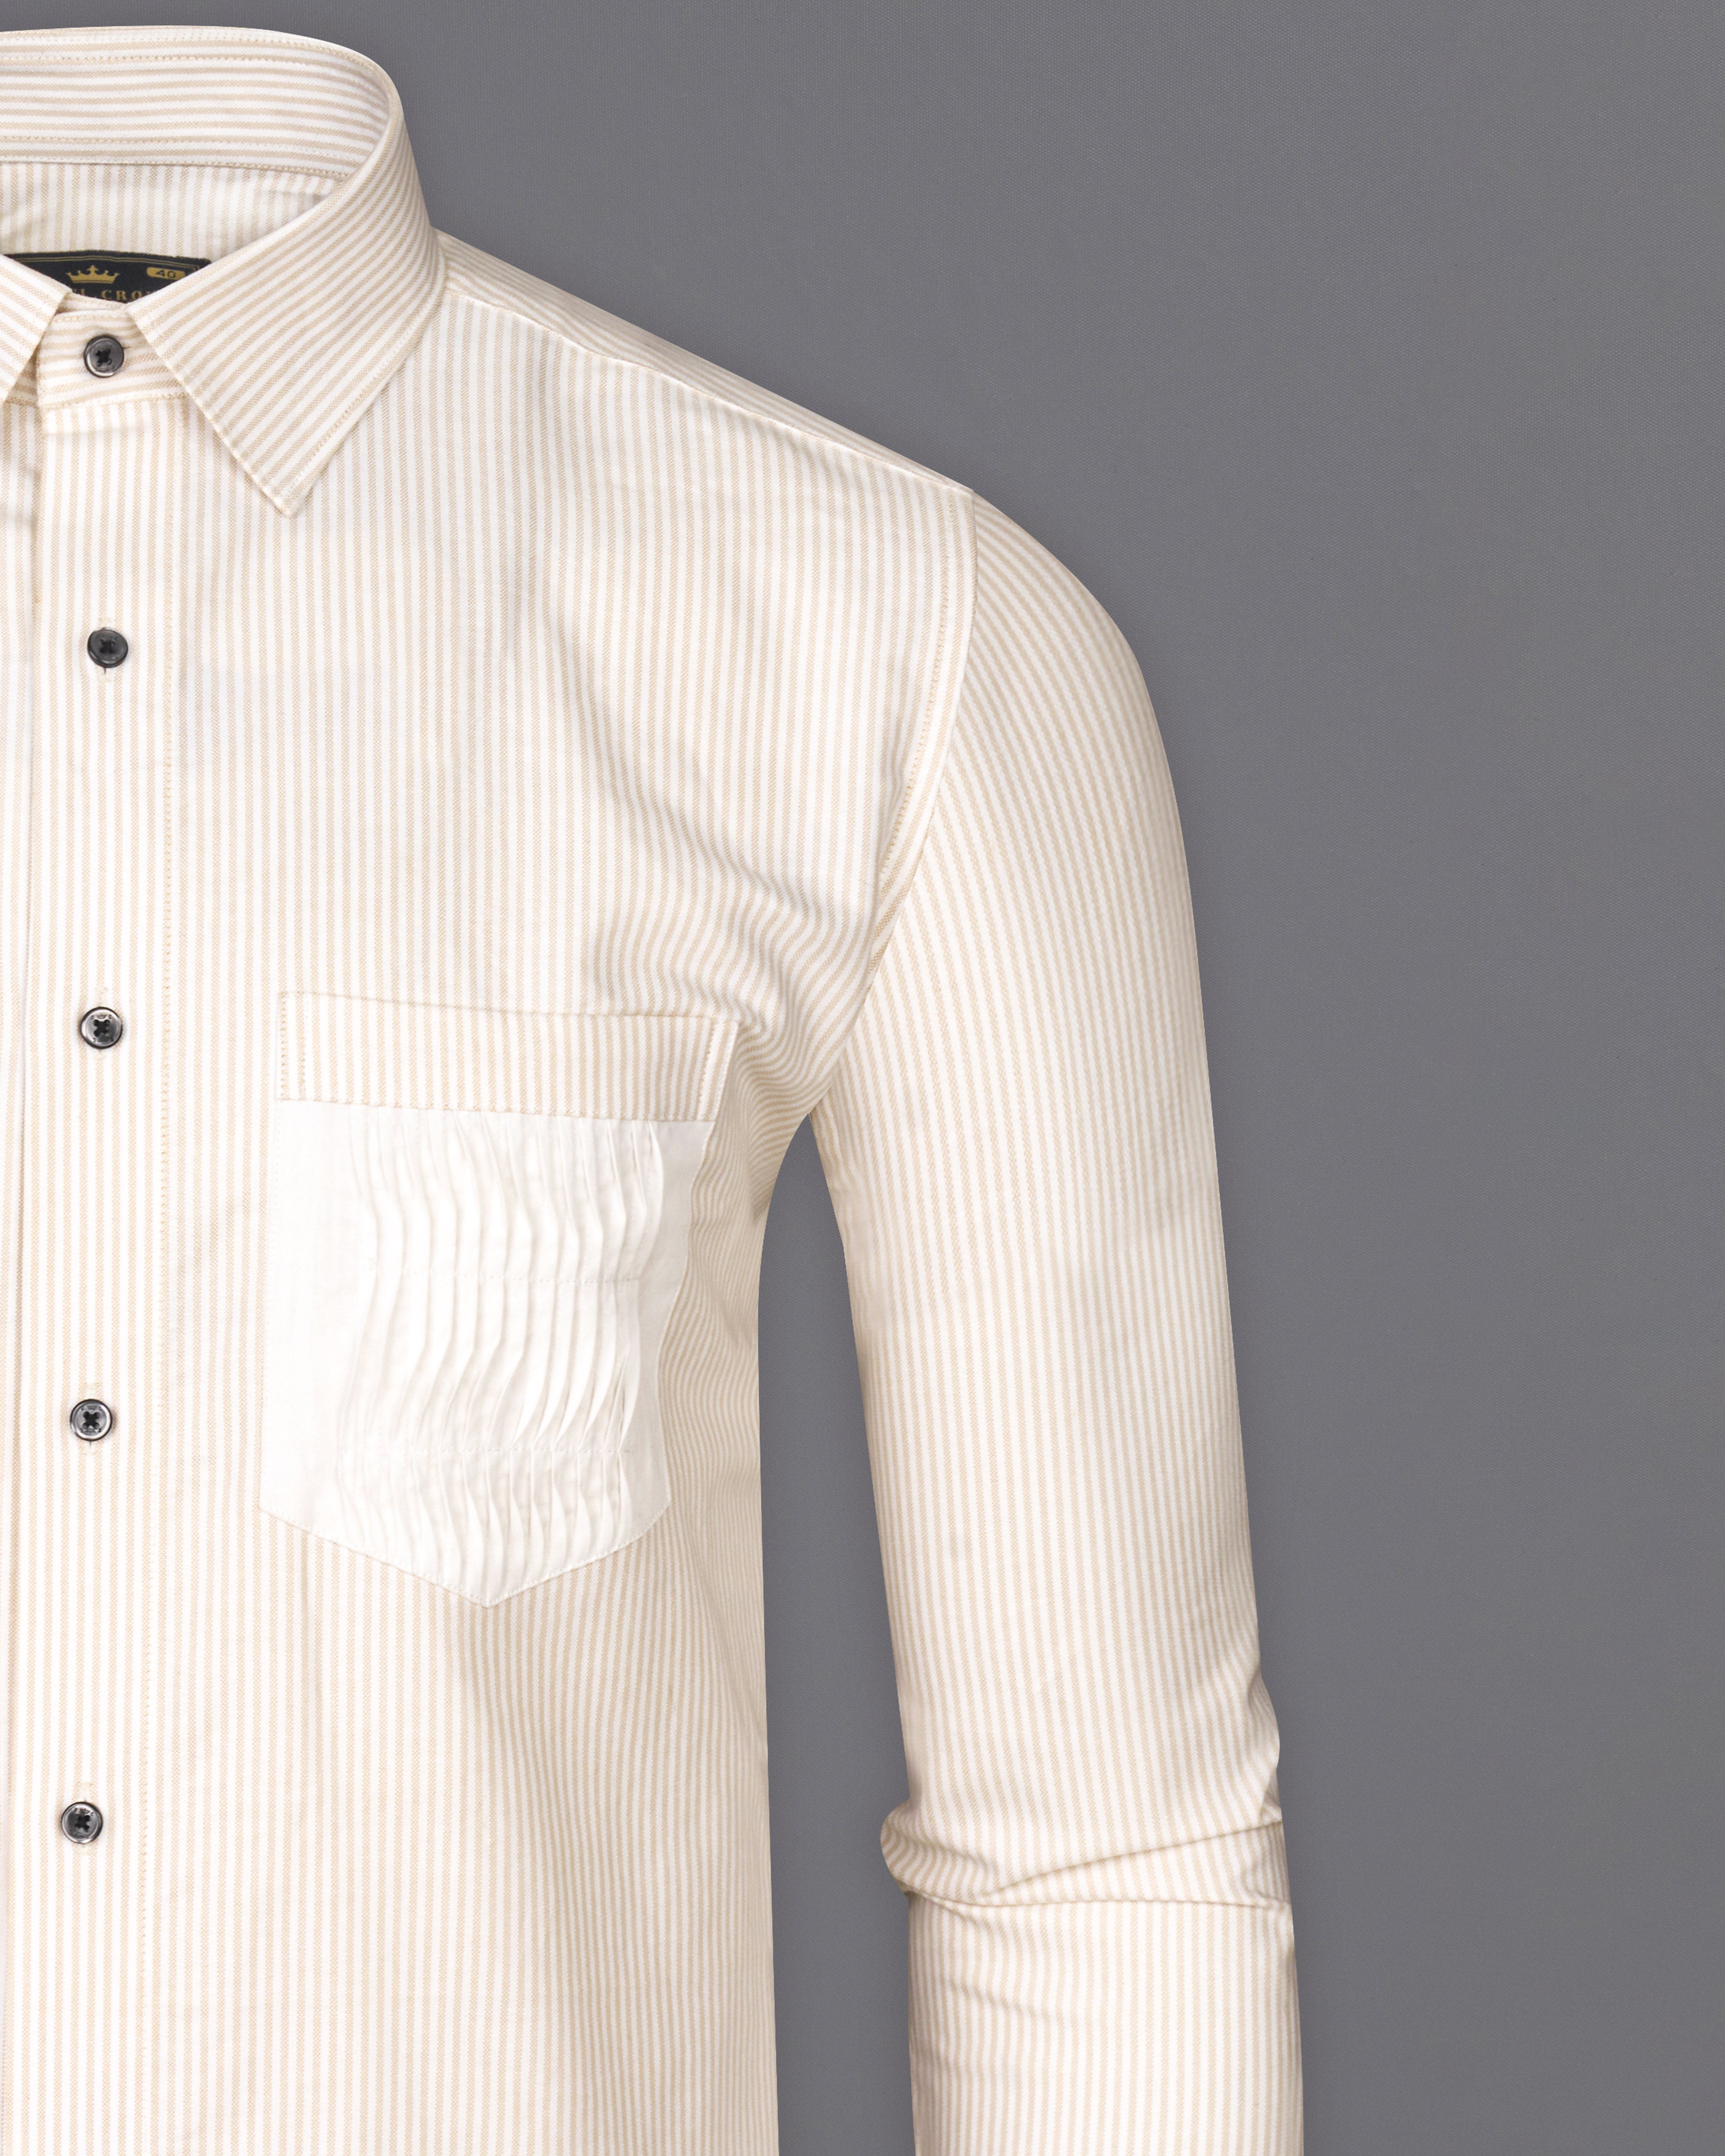 Old Lace Cream and White Pin Striped Royal Oxford Designer Shirt 9748-BLK-P372-38, 9748-BLK-P372-H-38, 9748-BLK-P372-39, 9748-BLK-P372-H-39, 9748-BLK-P372-40, 9748-BLK-P372-H-40, 9748-BLK-P372-42, 9748-BLK-P372-H-42, 9748-BLK-P372-44, 9748-BLK-P372-H-44, 9748-BLK-P372-46, 9748-BLK-P372-H-46, 9748-BLK-P372-48, 9748-BLK-P372-H-48, 9748-BLK-P372-50, 9748-BLK-P372-H-50, 9748-BLK-P372-52, 9748-BLK-P372-H-52